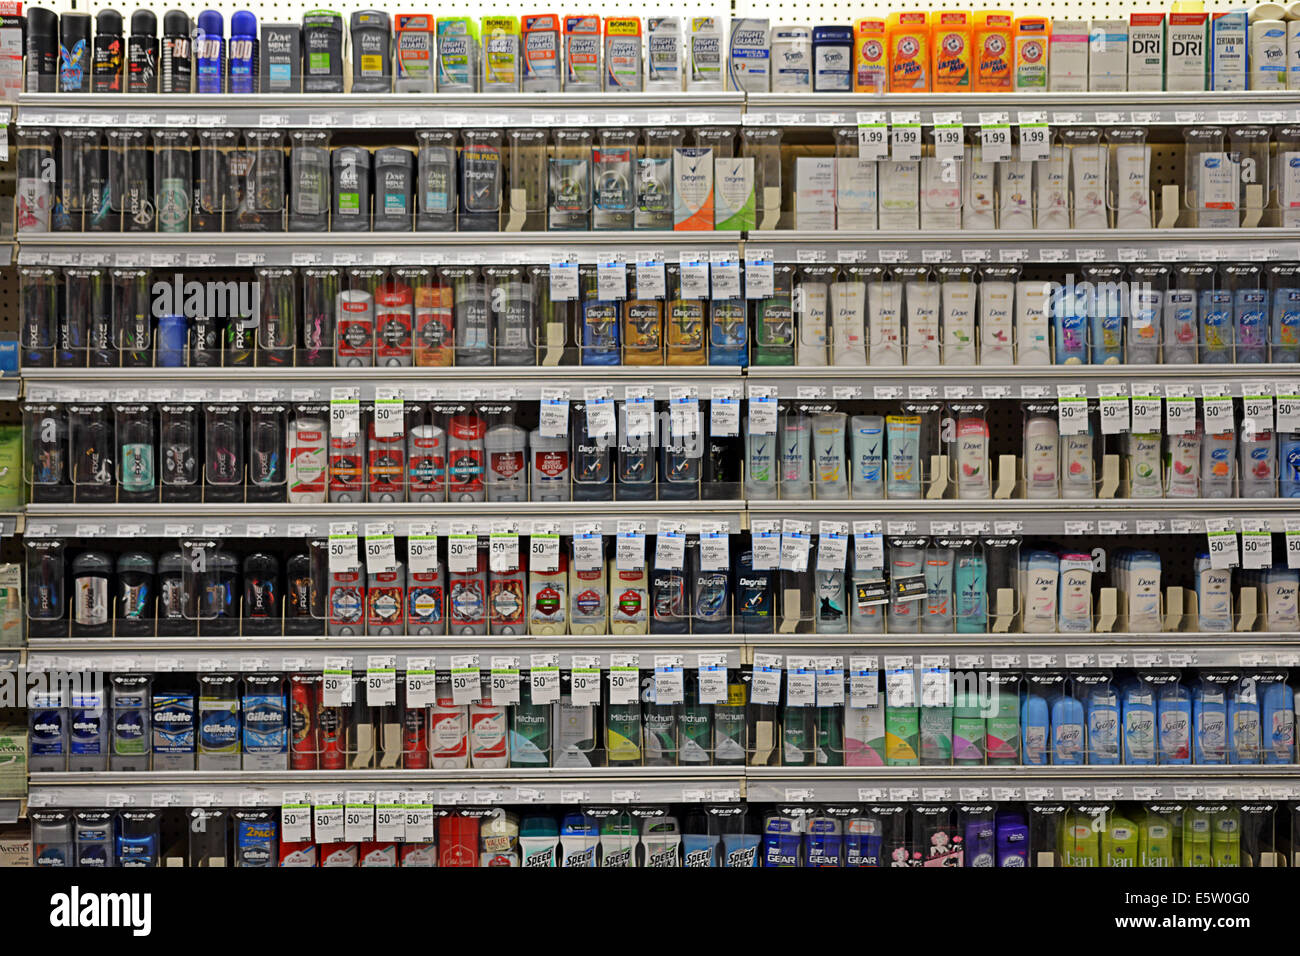 Shelves of deodorant for sale at a supermarket & pharmacy in Greenwich Village, Manhattan, New York Stock Photo